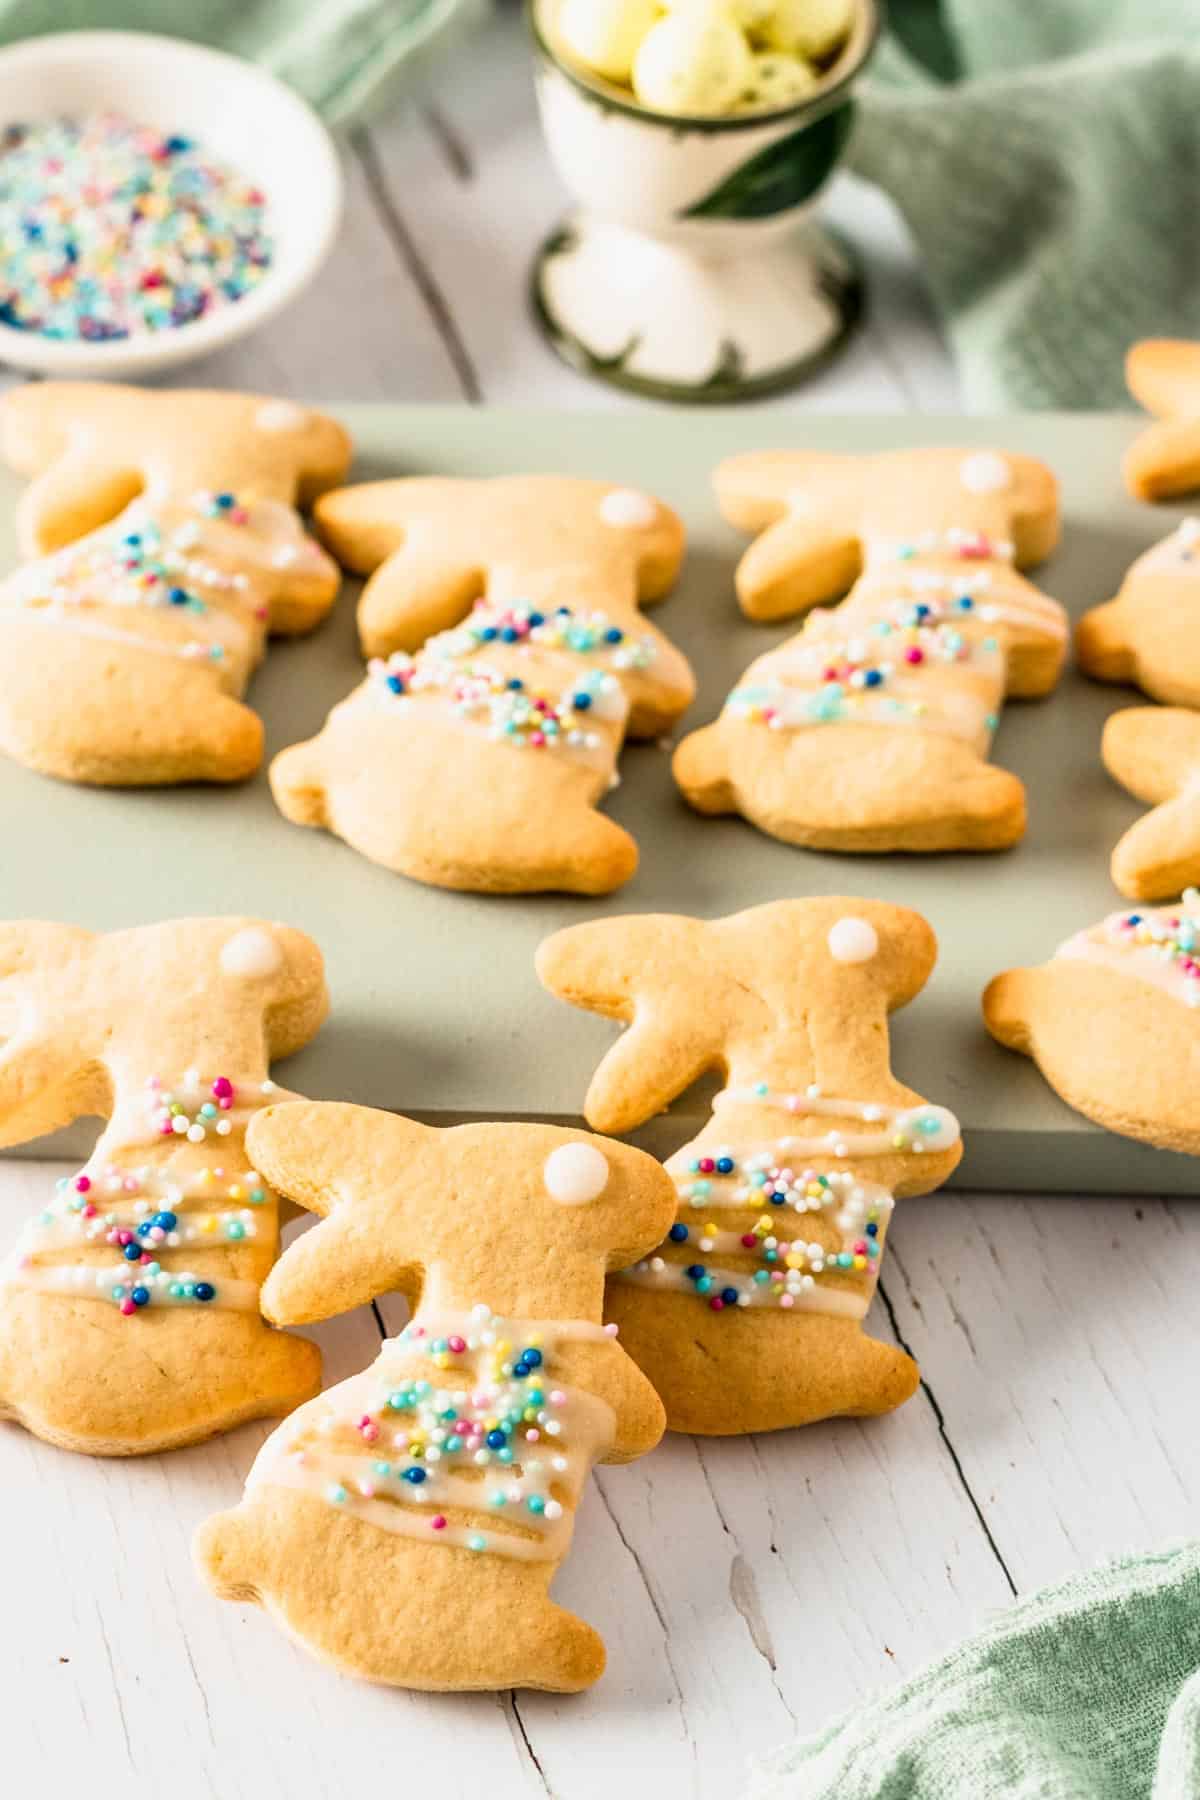 Bunny shaped sugar cookies with icing on a plate